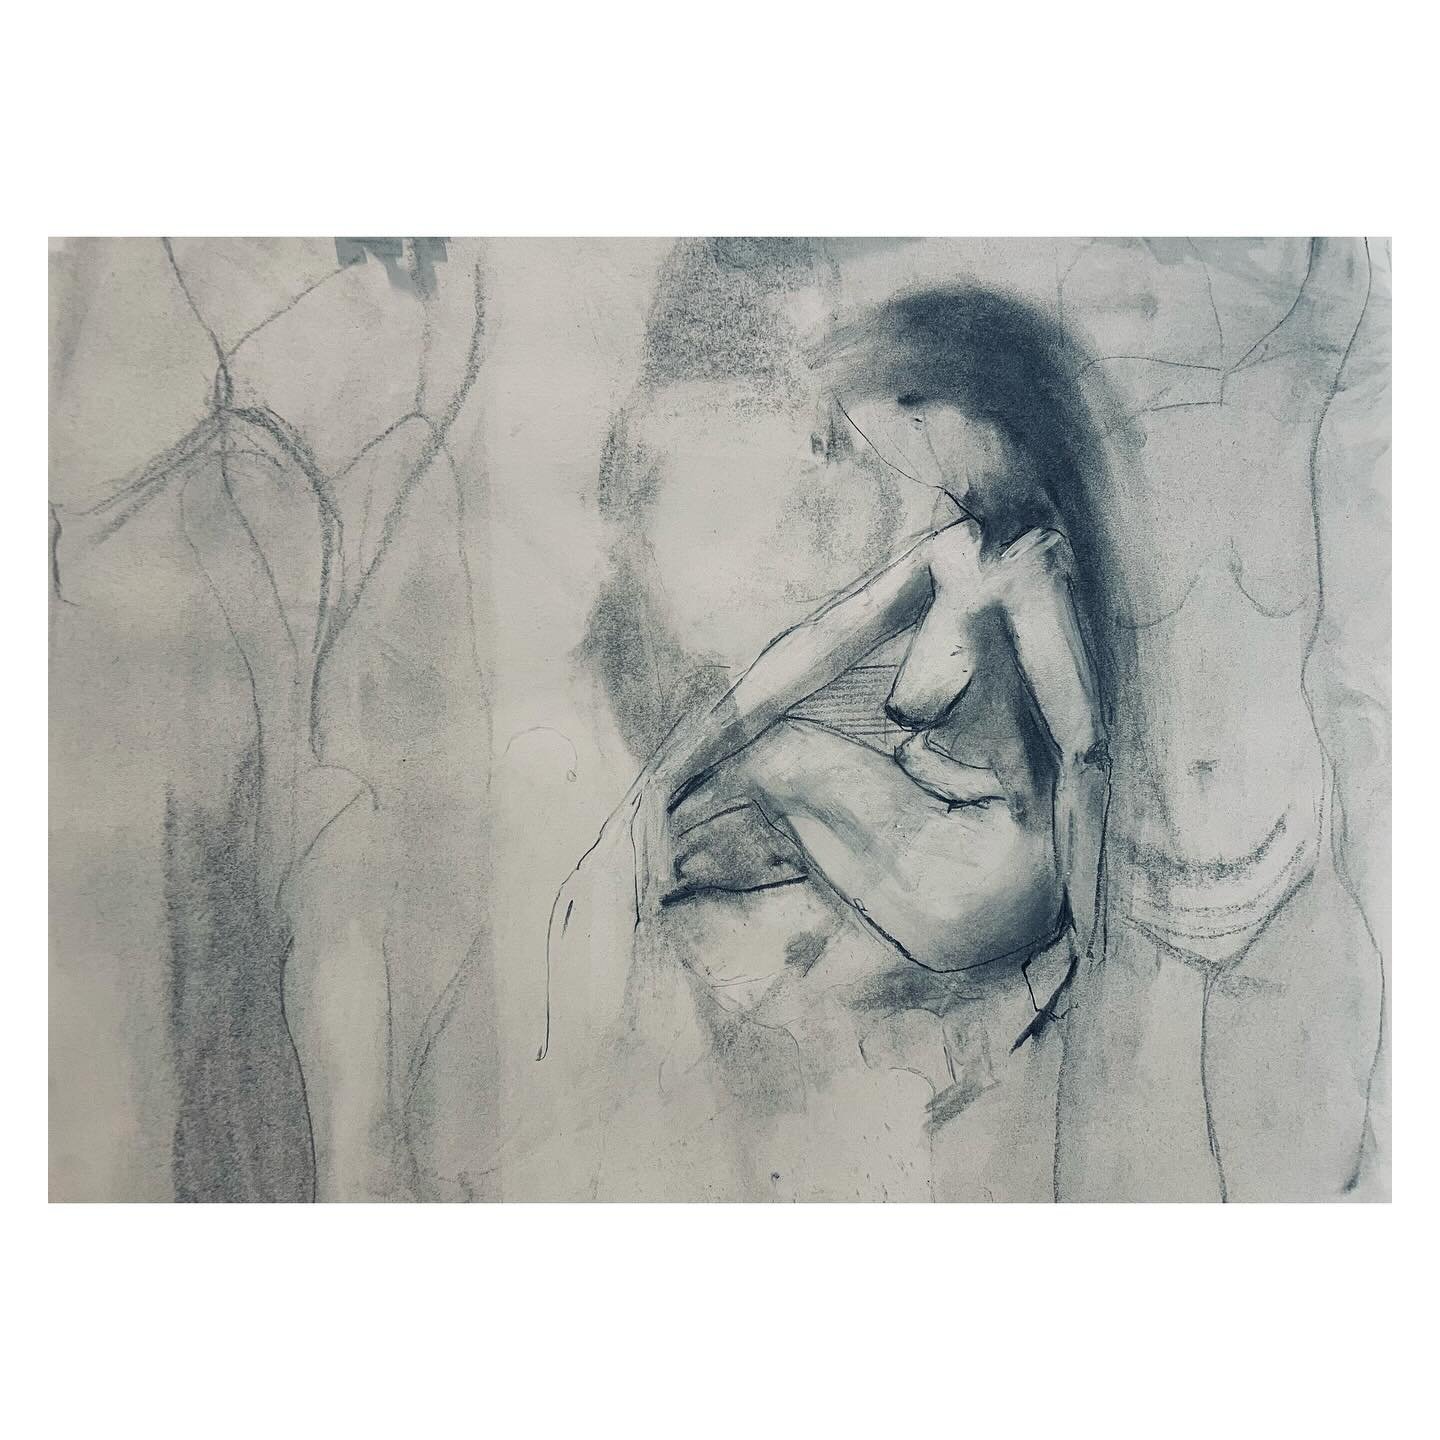 A few from week 1. Charcoal, chalk, cloth. Erasing and rotating our drawings, short and intense poses. Each line fades into the paper providing a record of our journey. Chunks of willow charcoal provide the perfect flexible drawing buddy. #lifedrawin